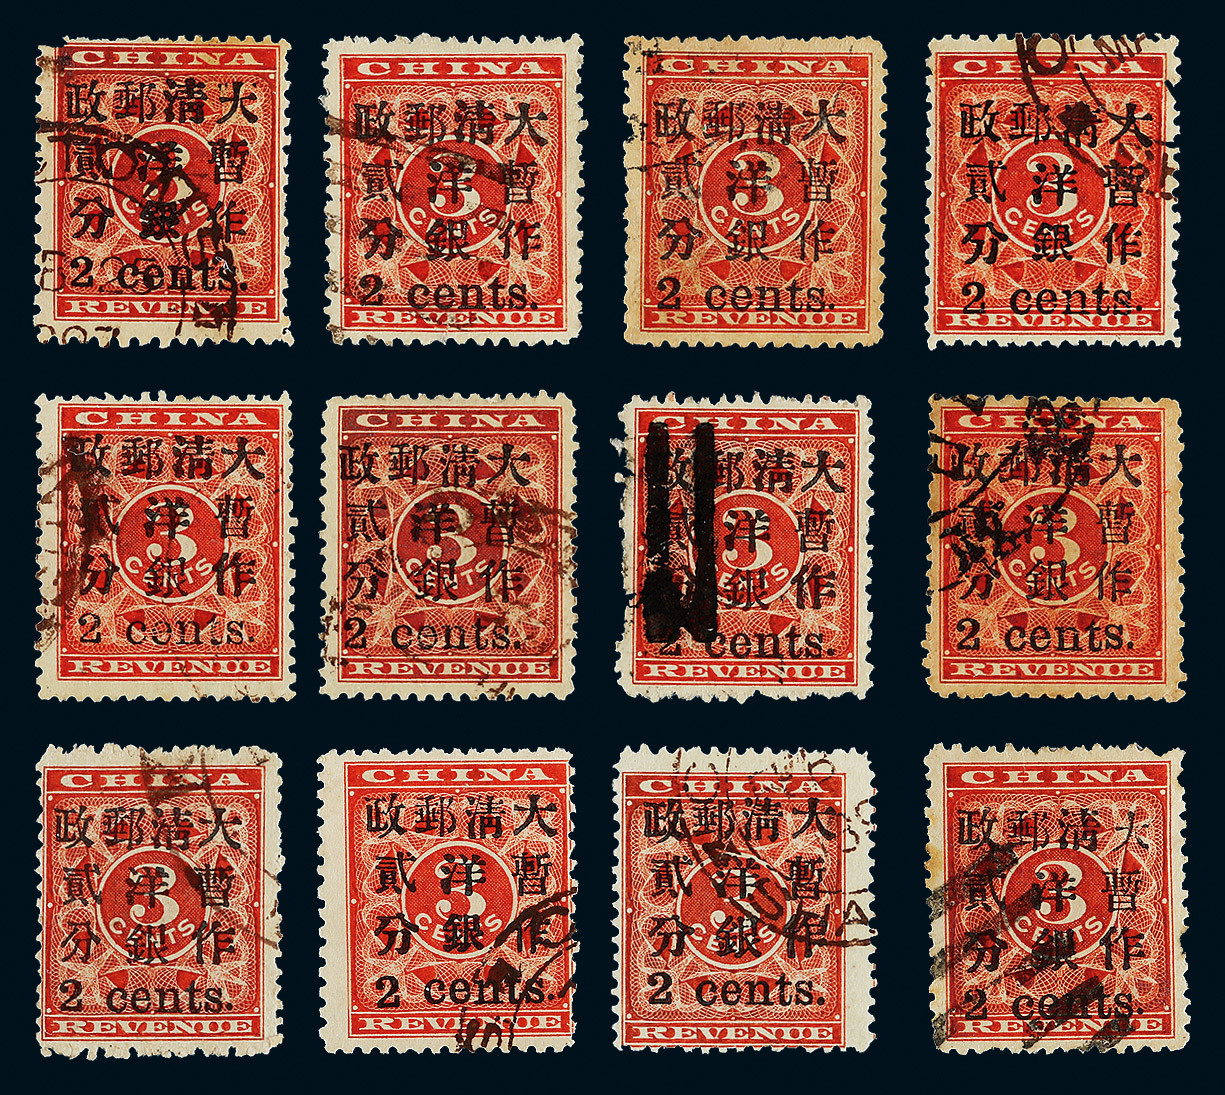 1897 Red Revenue small 2 cents used group of 12. Different positions. Fine